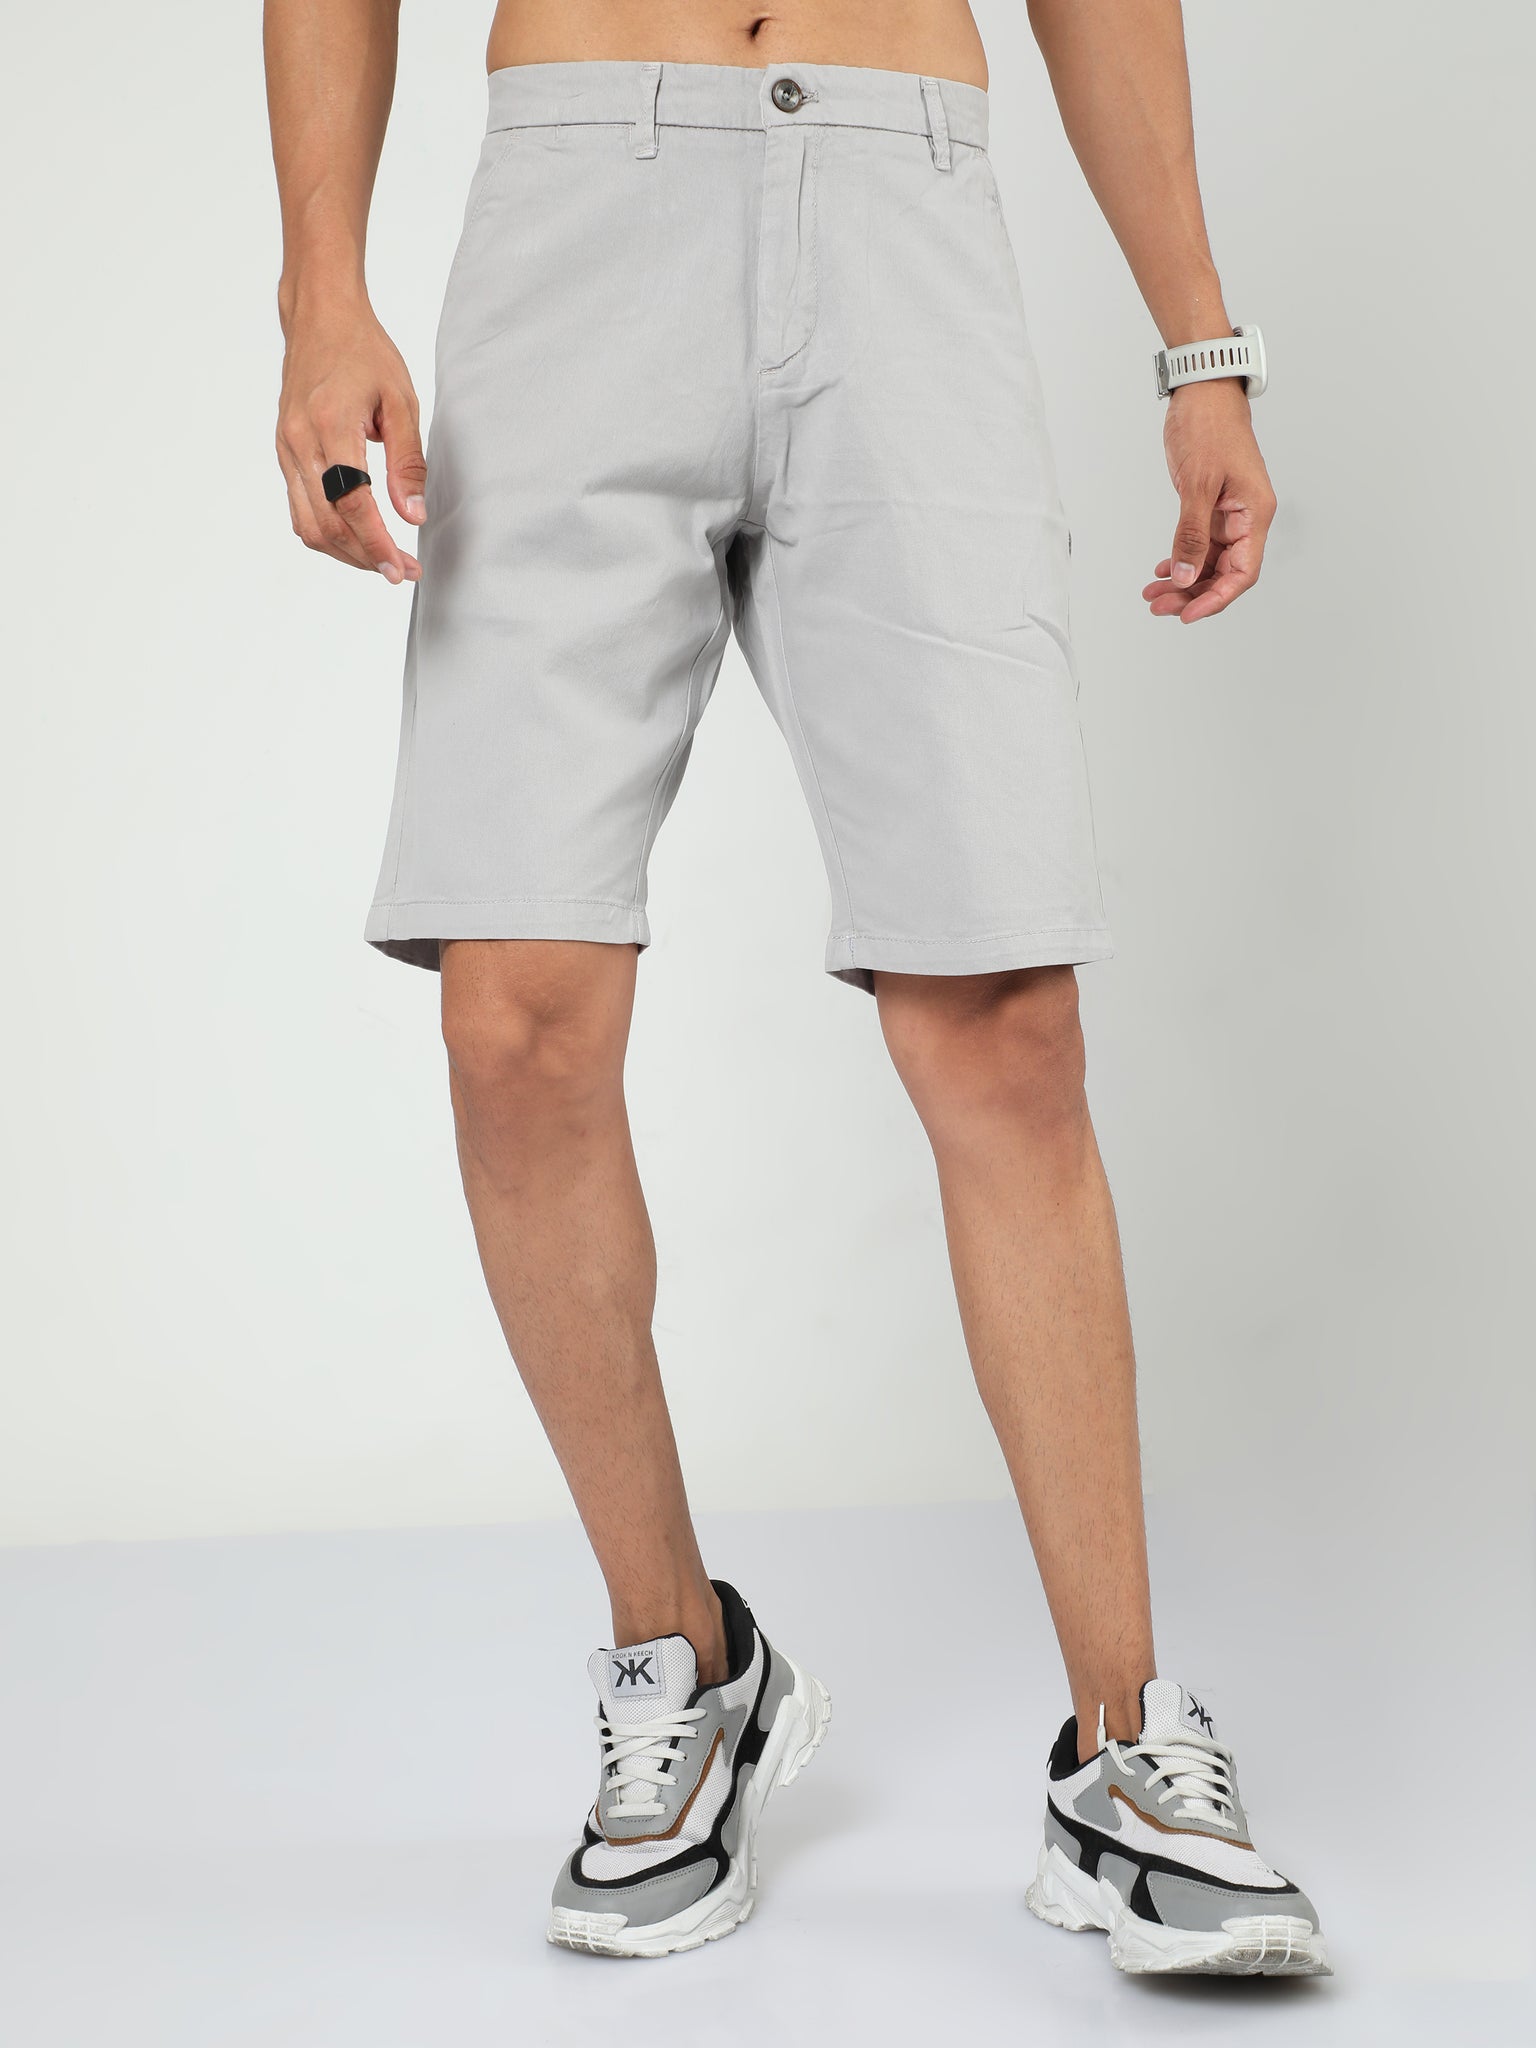 French Grey Shorts for Men